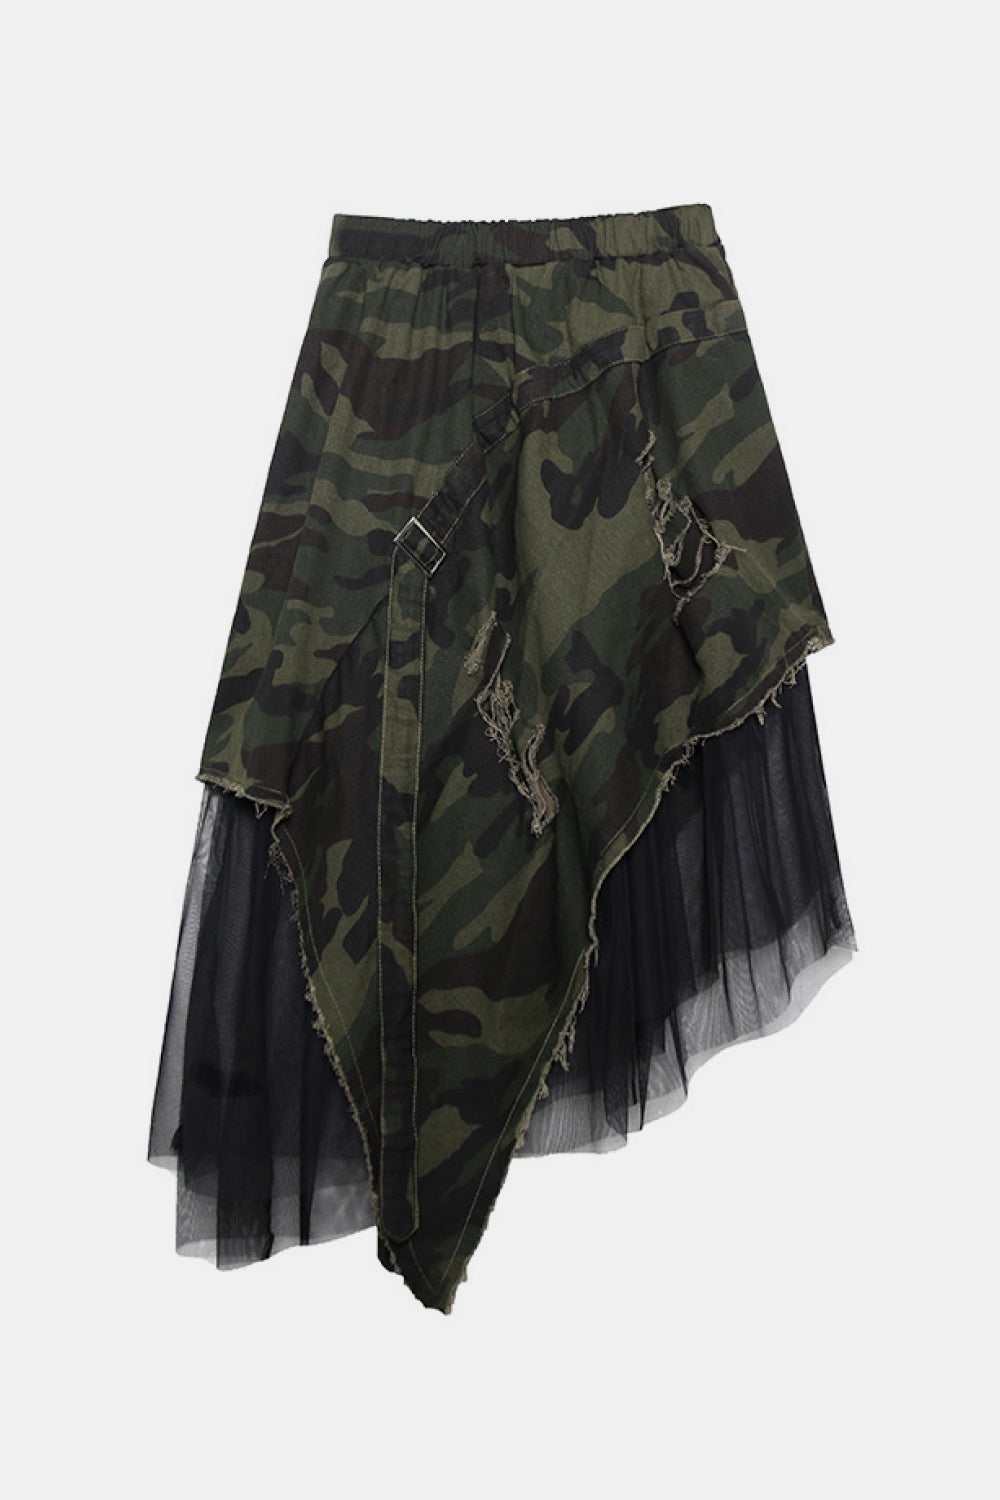 Get noticed for all the right reasons with our Work Your Angles Camo Asymmetrical Distressed Denim Skirt. This unique skirt features a wide elastic waistband, camouflage print patterning and mesh. Pair with your favorite sexy bodysuit and stiletto heels.